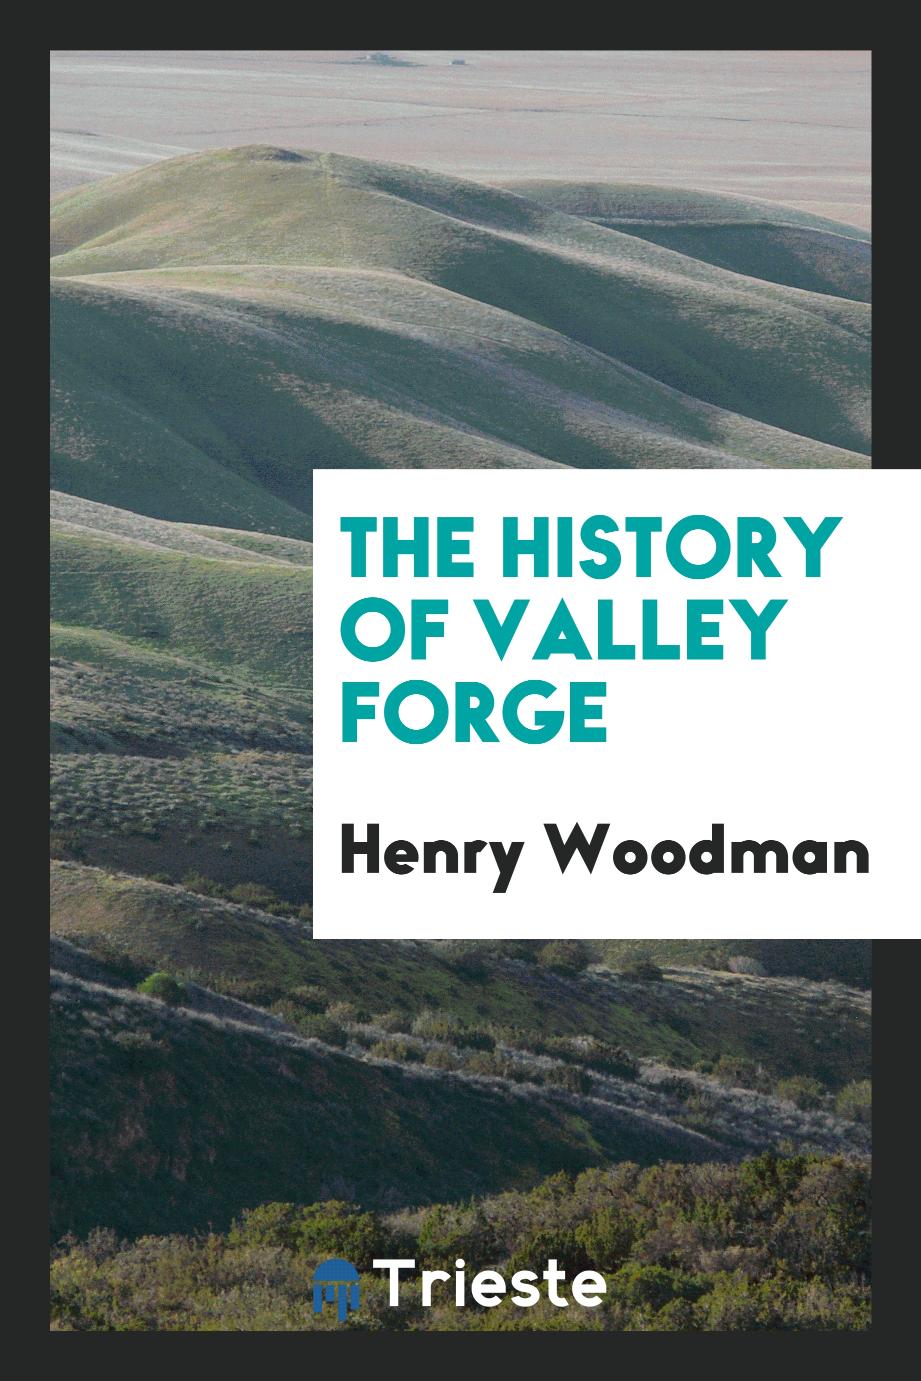 The history of Valley Forge